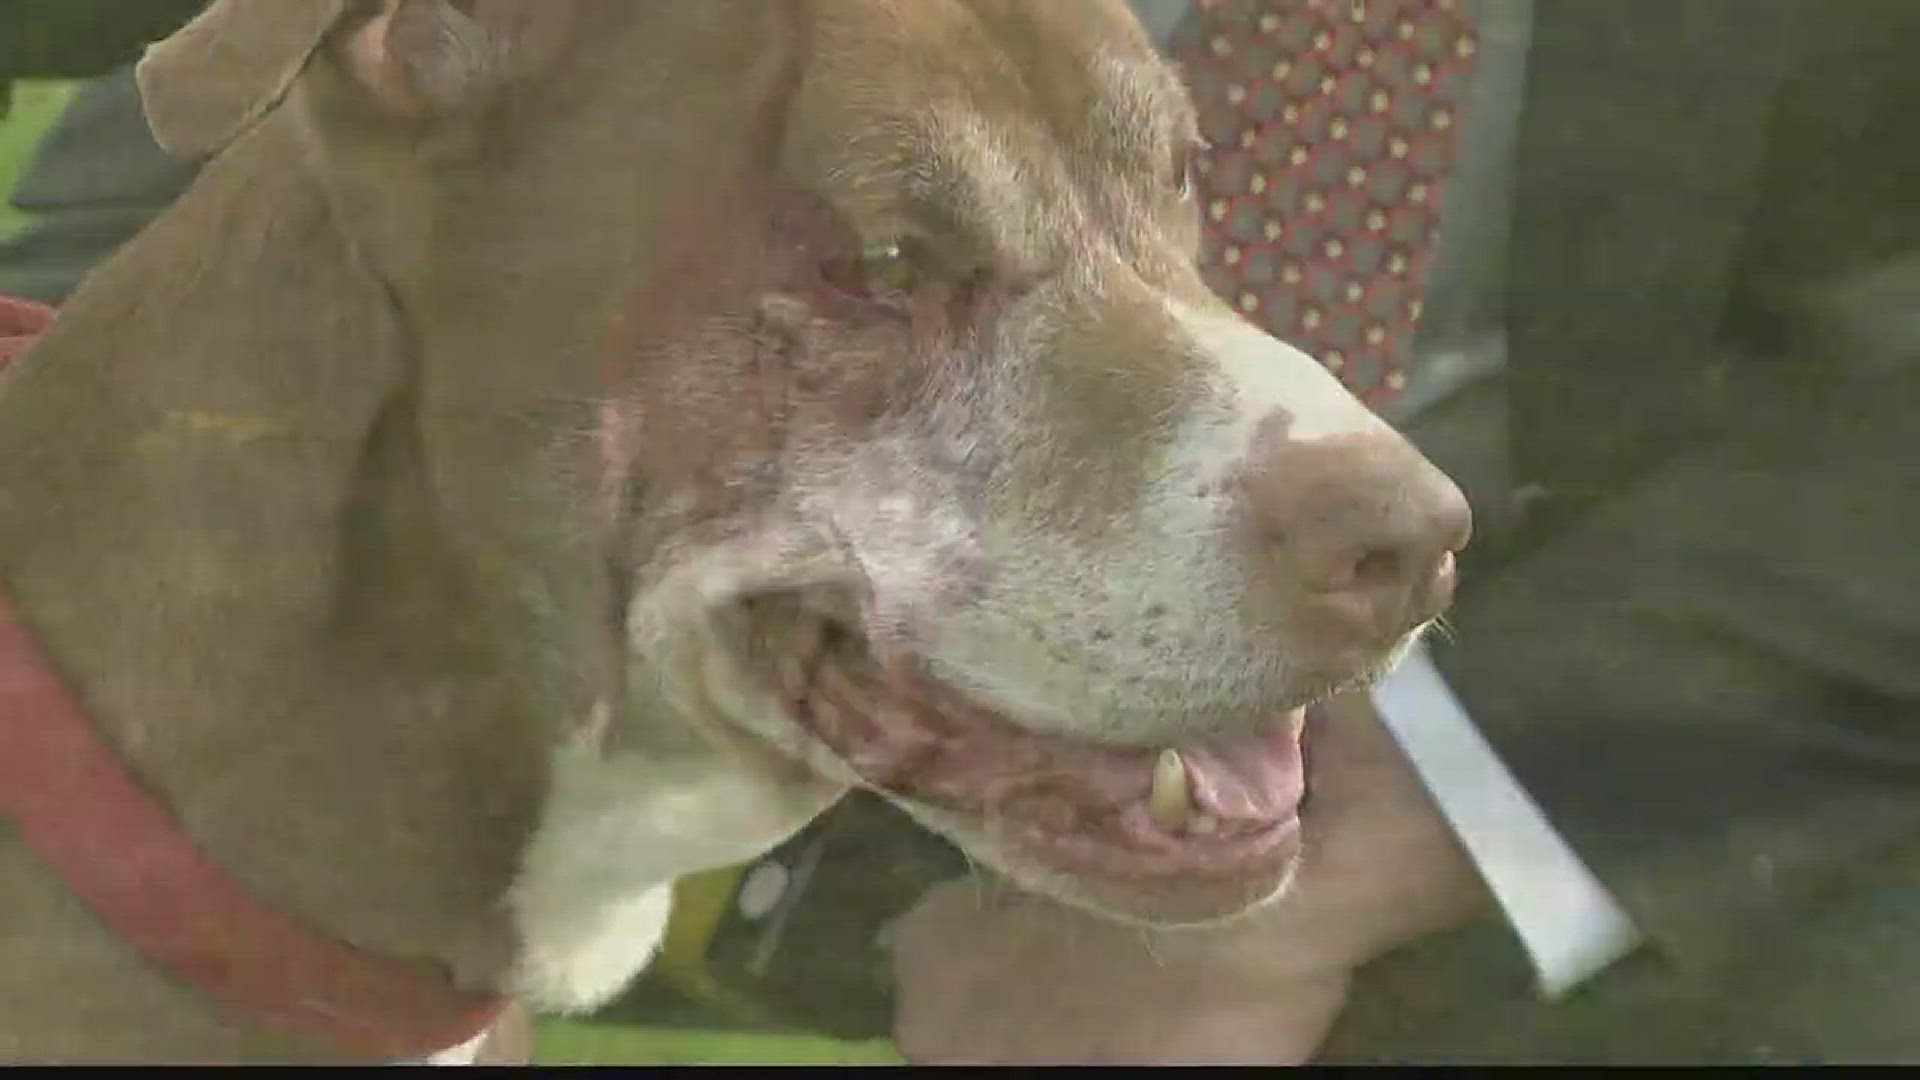 John Beard introduces us to a pitbull looking to find his forever home.